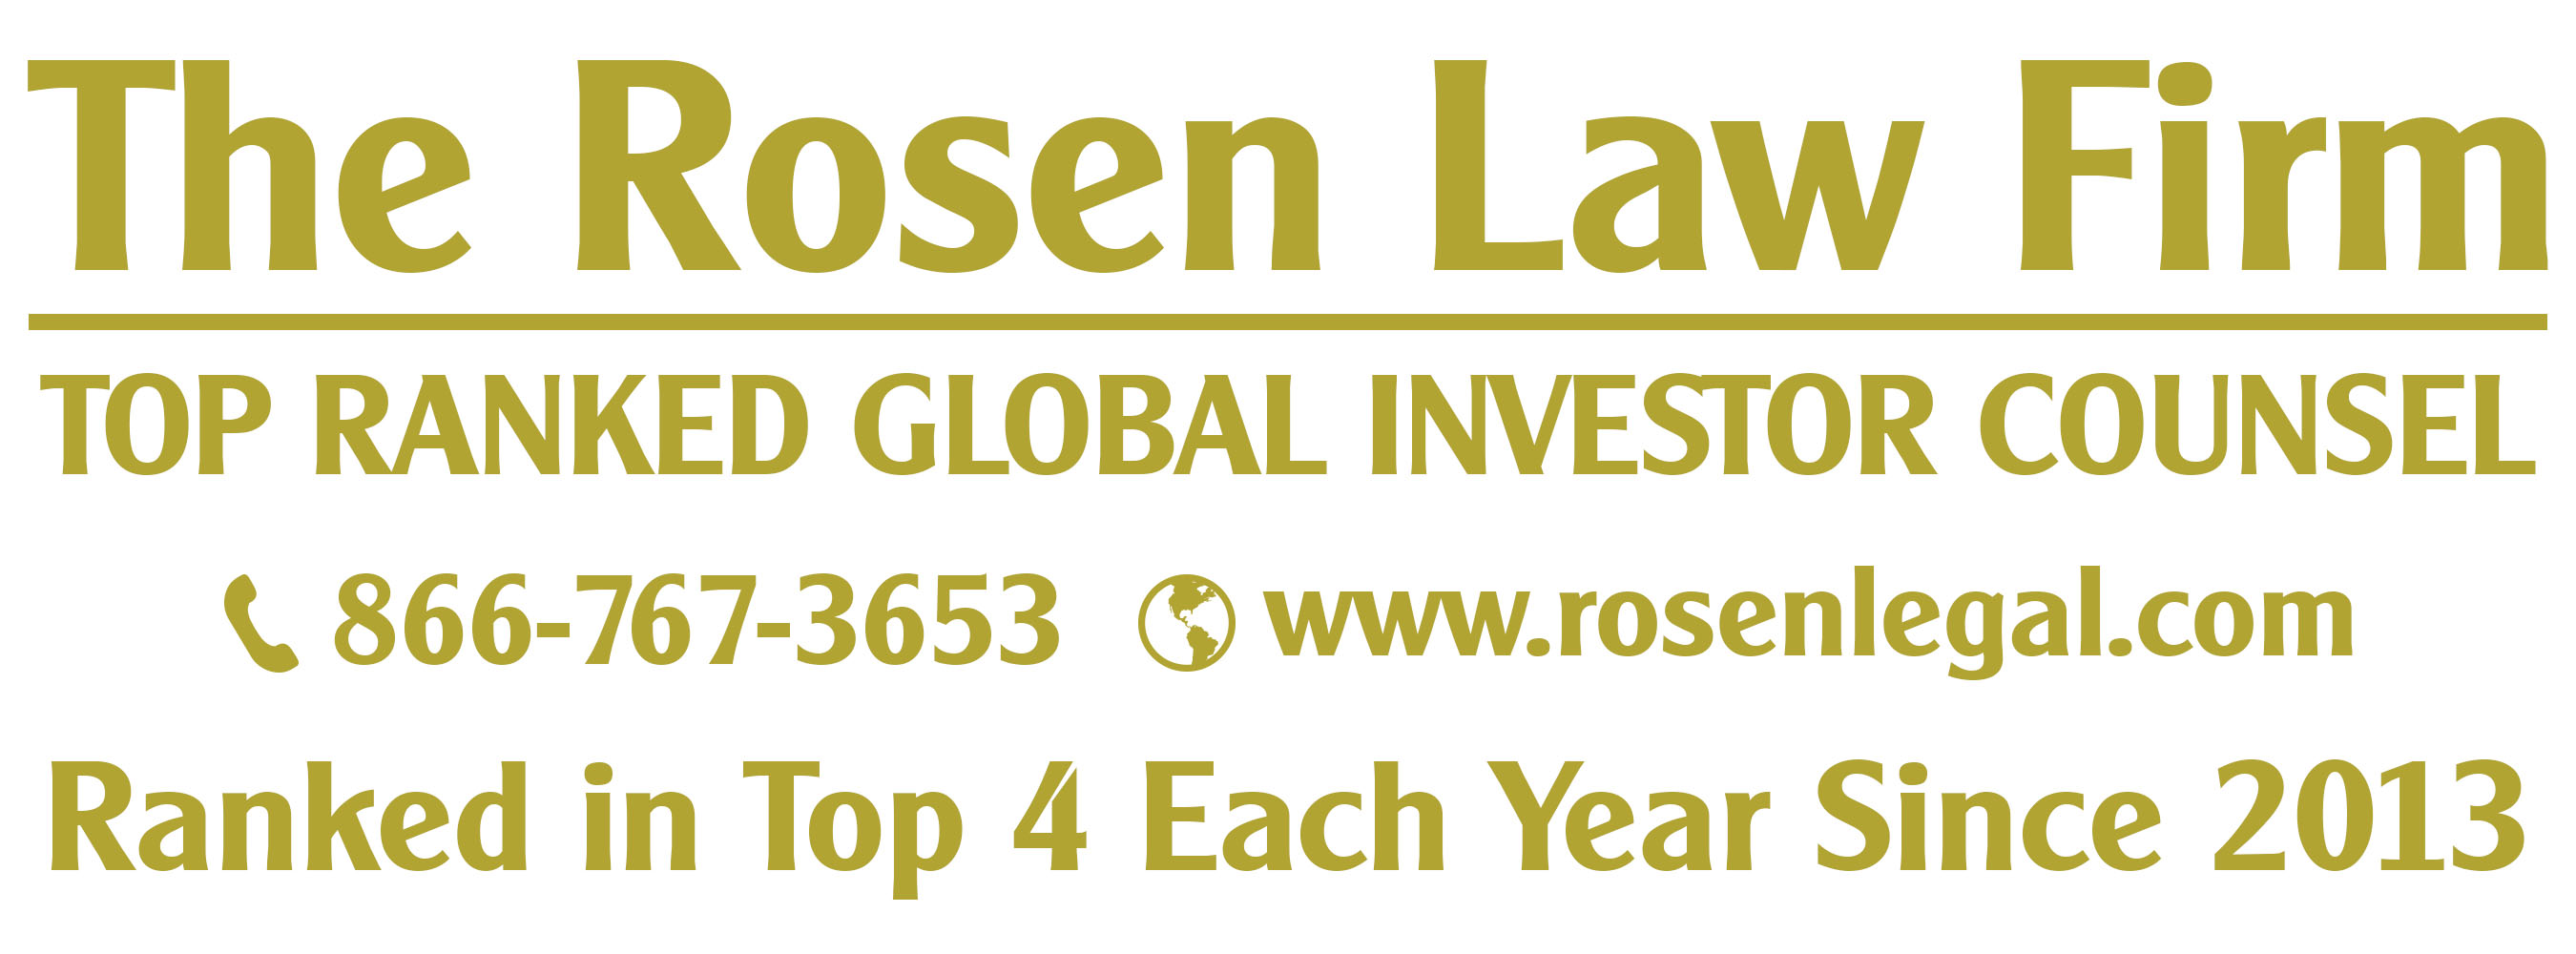 Rosen Law Firm PA, Monday, September 26, 2022, Press release picture